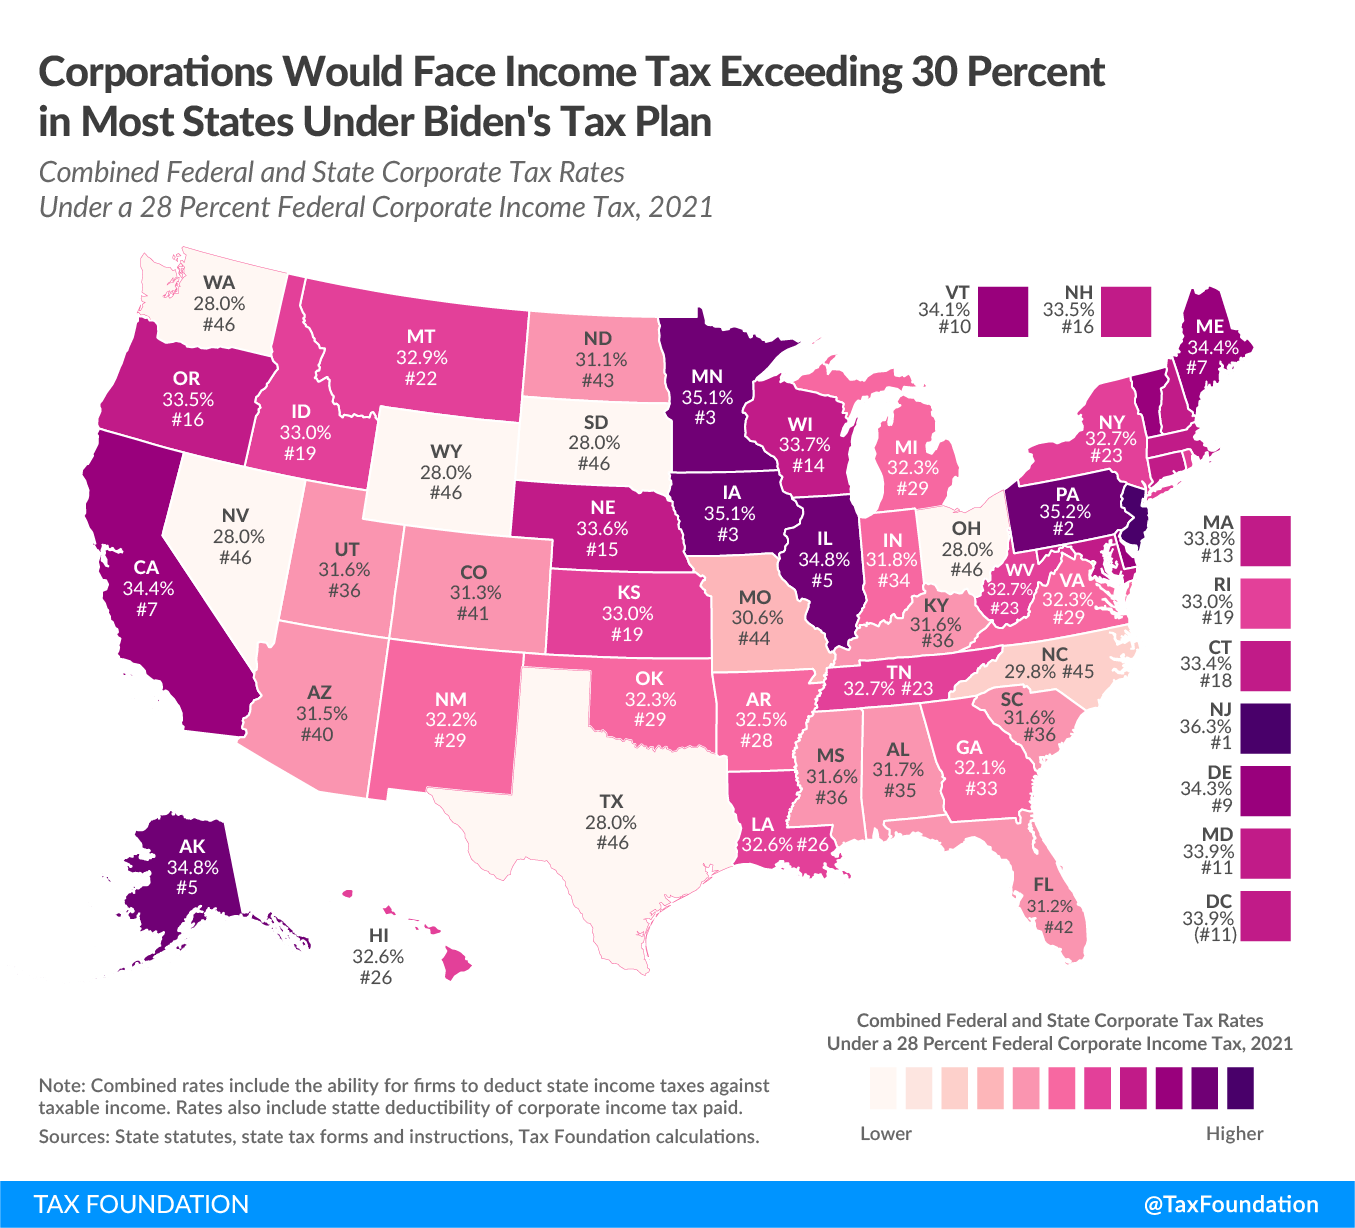 Combined Corporate Rates Would Exceed 30 Percent in Most States Under Biden’s Tax Plan, combined corporate rate biden tax plan, combined federal and state corporate tax rate Biden tax plan, Corporations would face 30 percent income tax rate under Biden tax plan